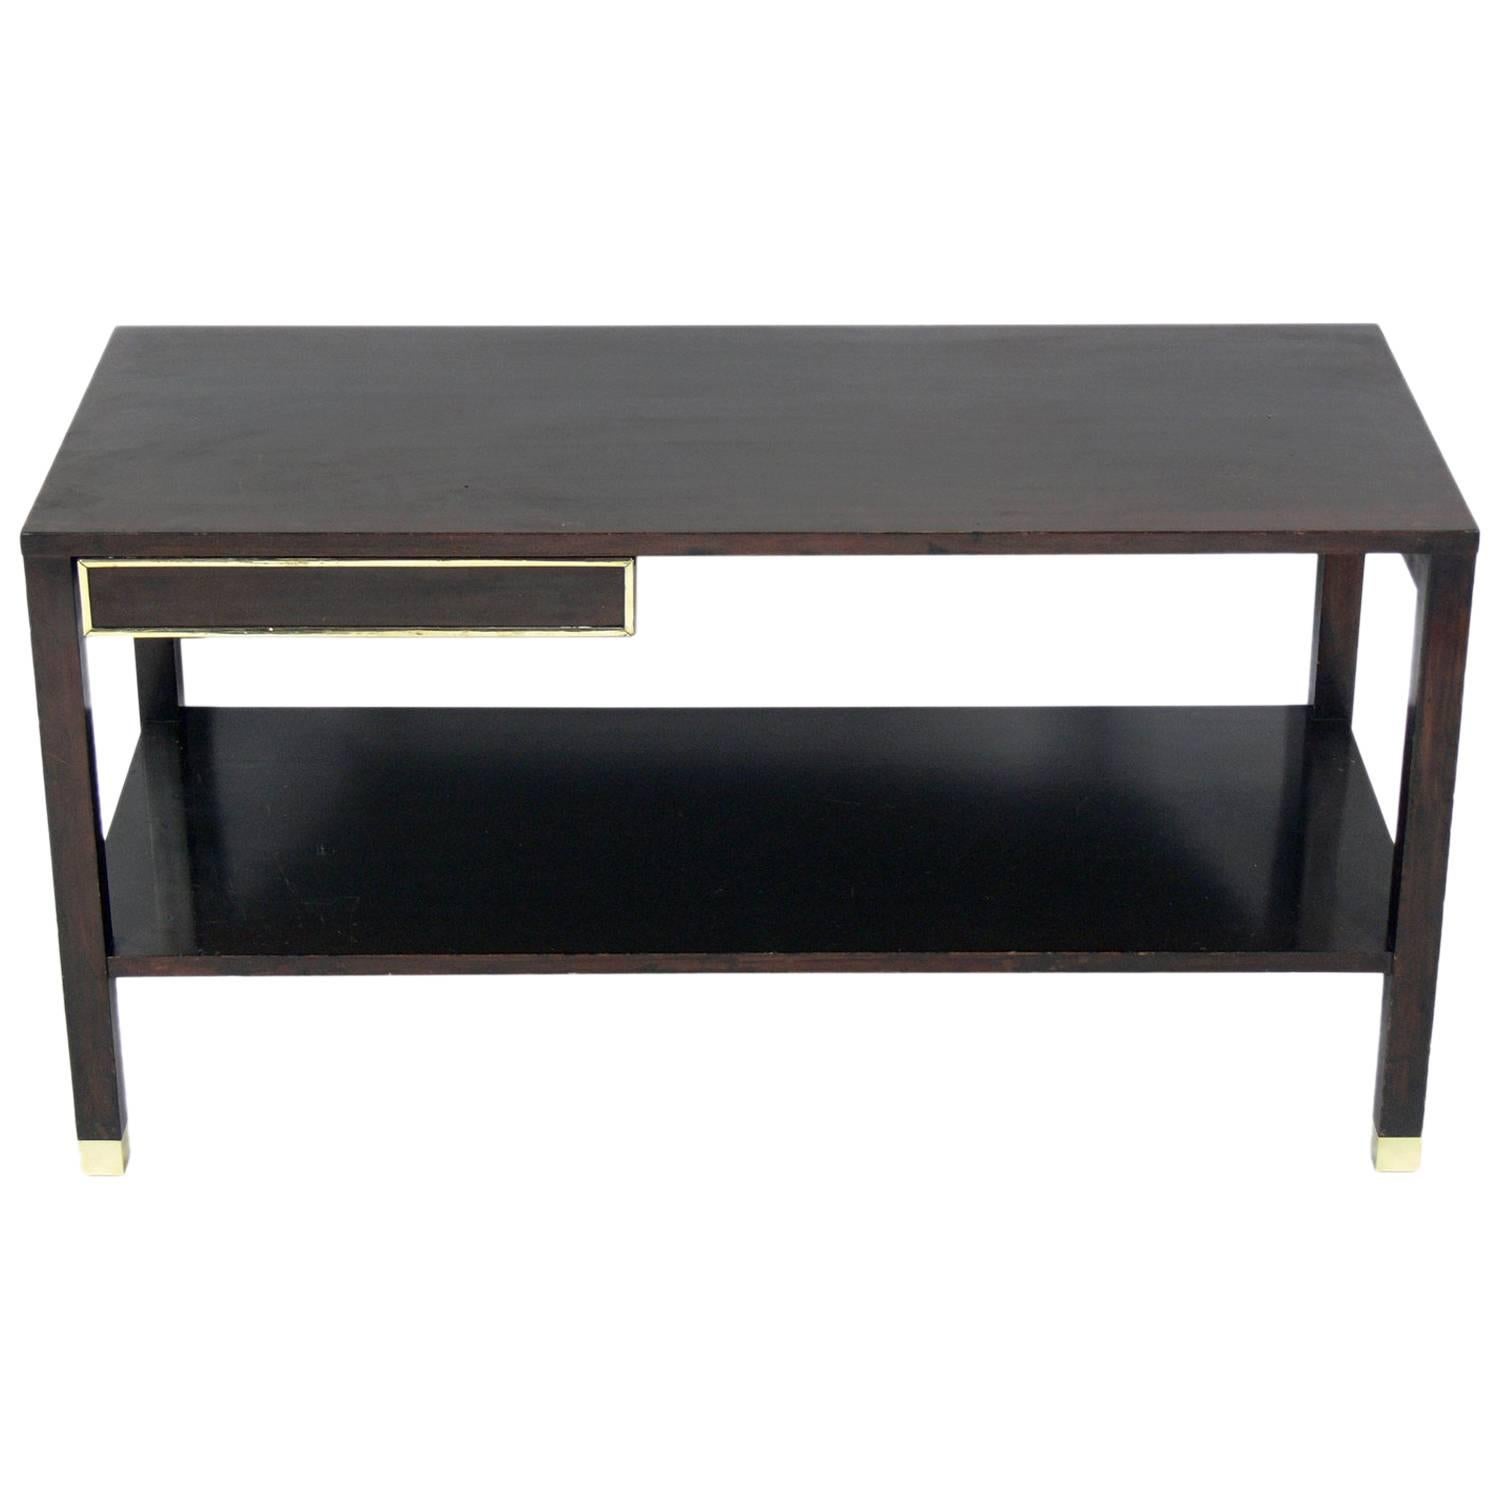 Low Slung Console Table or Bar by Harvey Probber